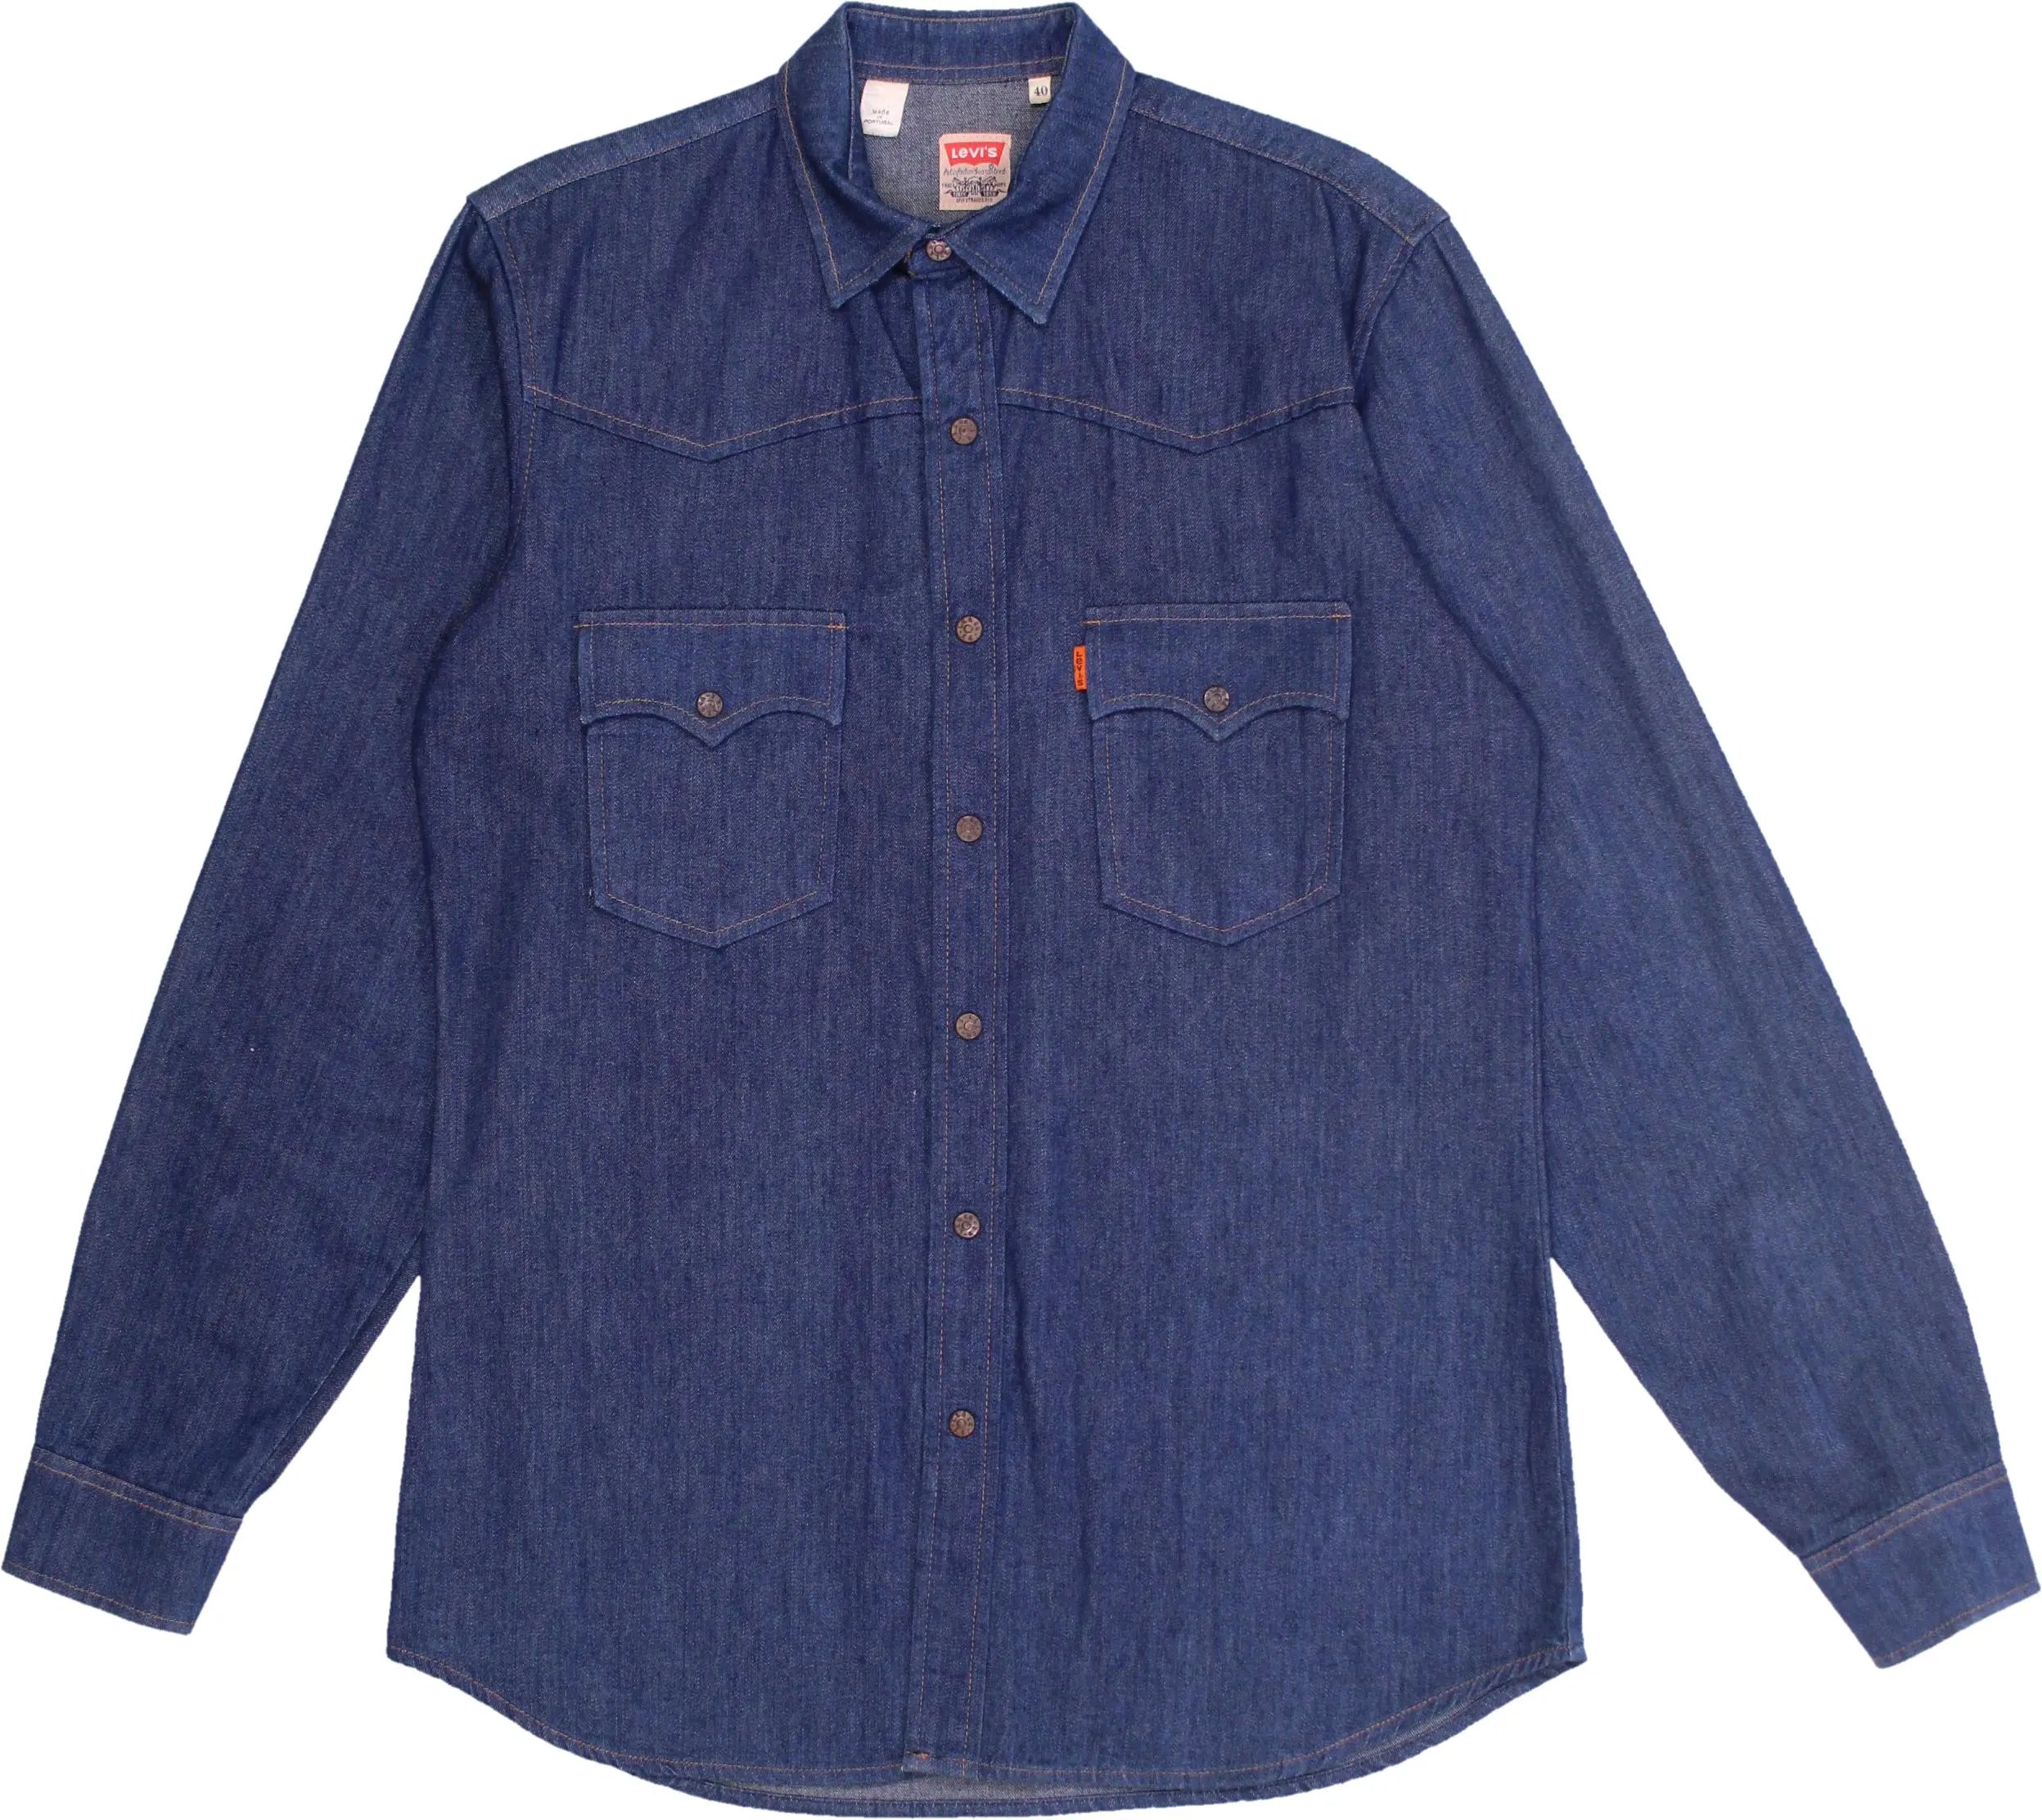 Levi's - Orange Tab Denim Shirt by Levi's- ThriftTale.com - Vintage and second handclothing